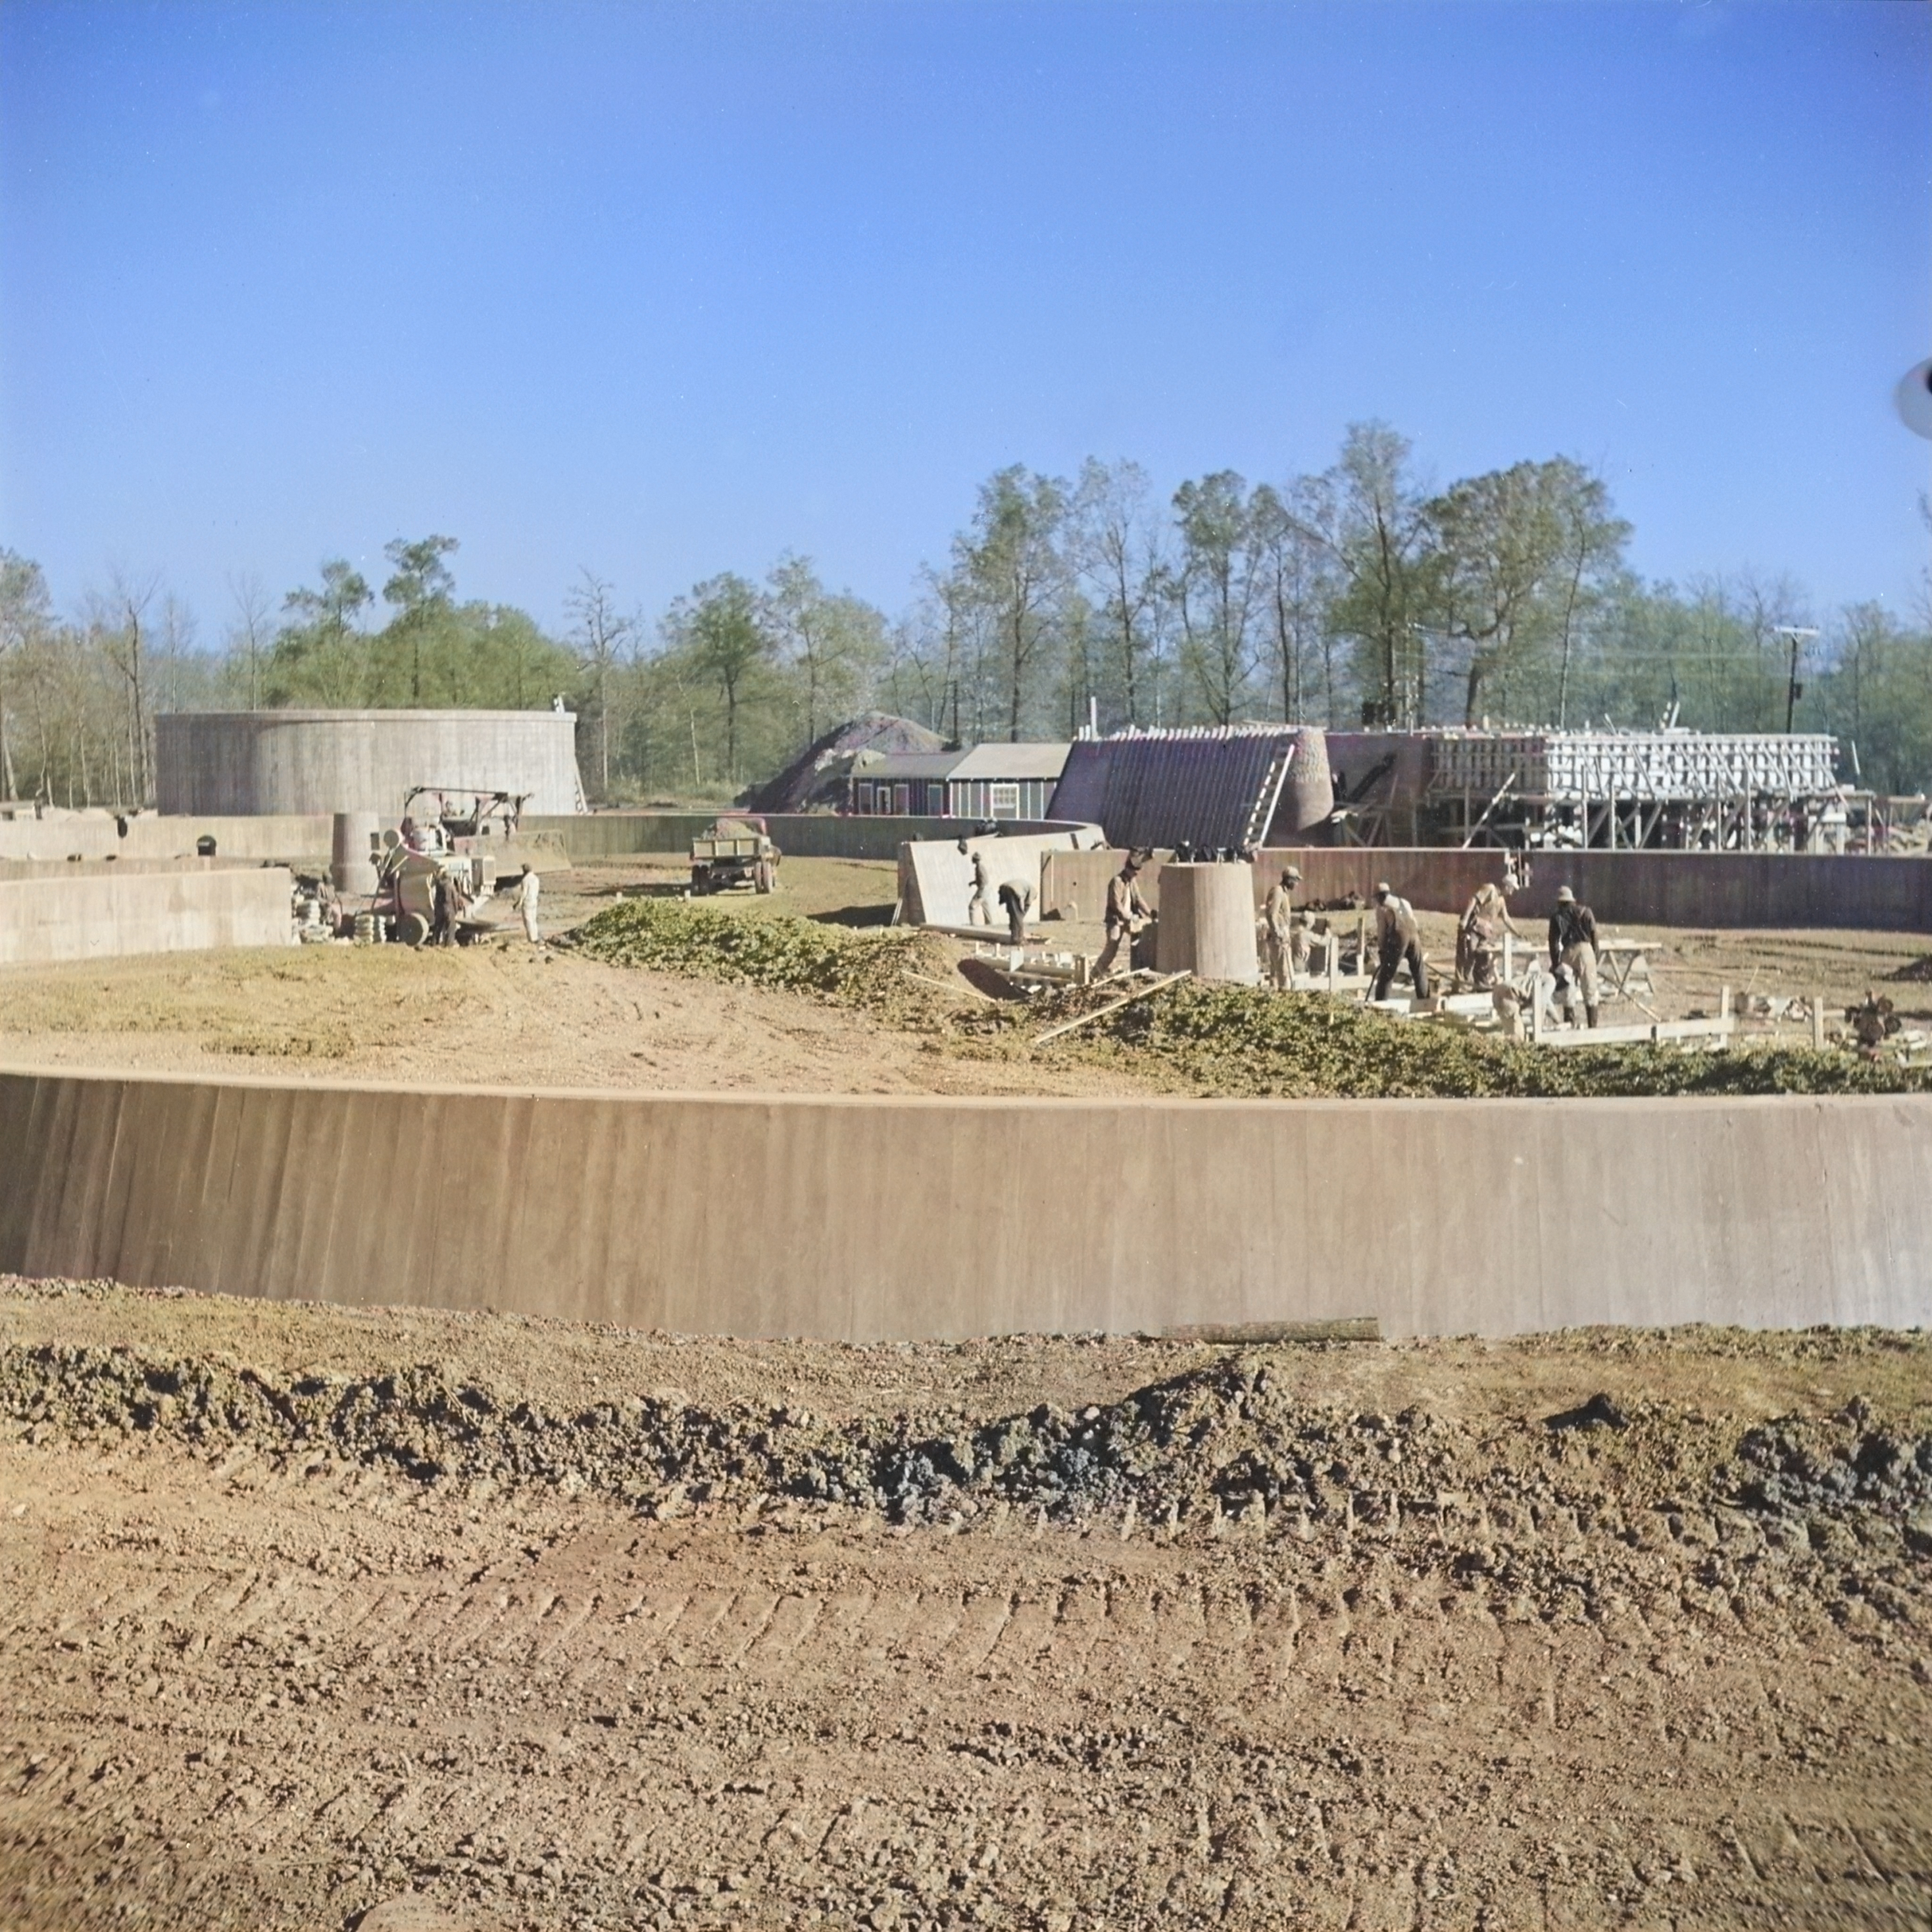 Construction of the sewage disposal plant at Jerome War Relocation Center, Arkansas, United States, 14 Nov 1942, photo 2 of 5 [Colorized by WW2DB]